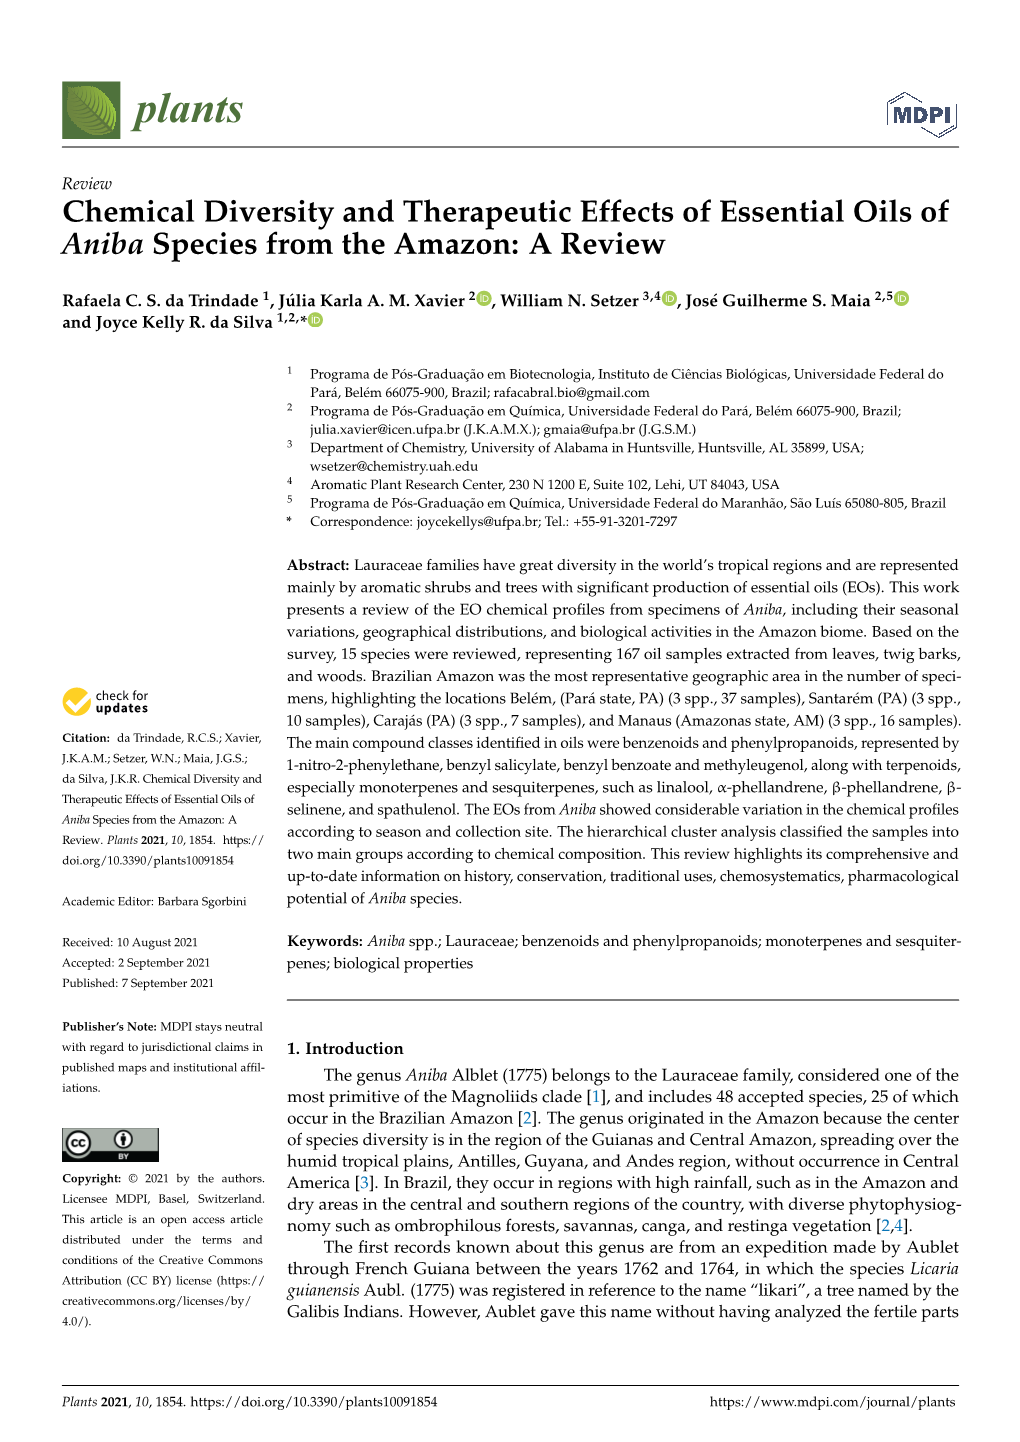 Chemical Diversity and Therapeutic Effects of Essential Oils of Aniba Species from the Amazon: a Review